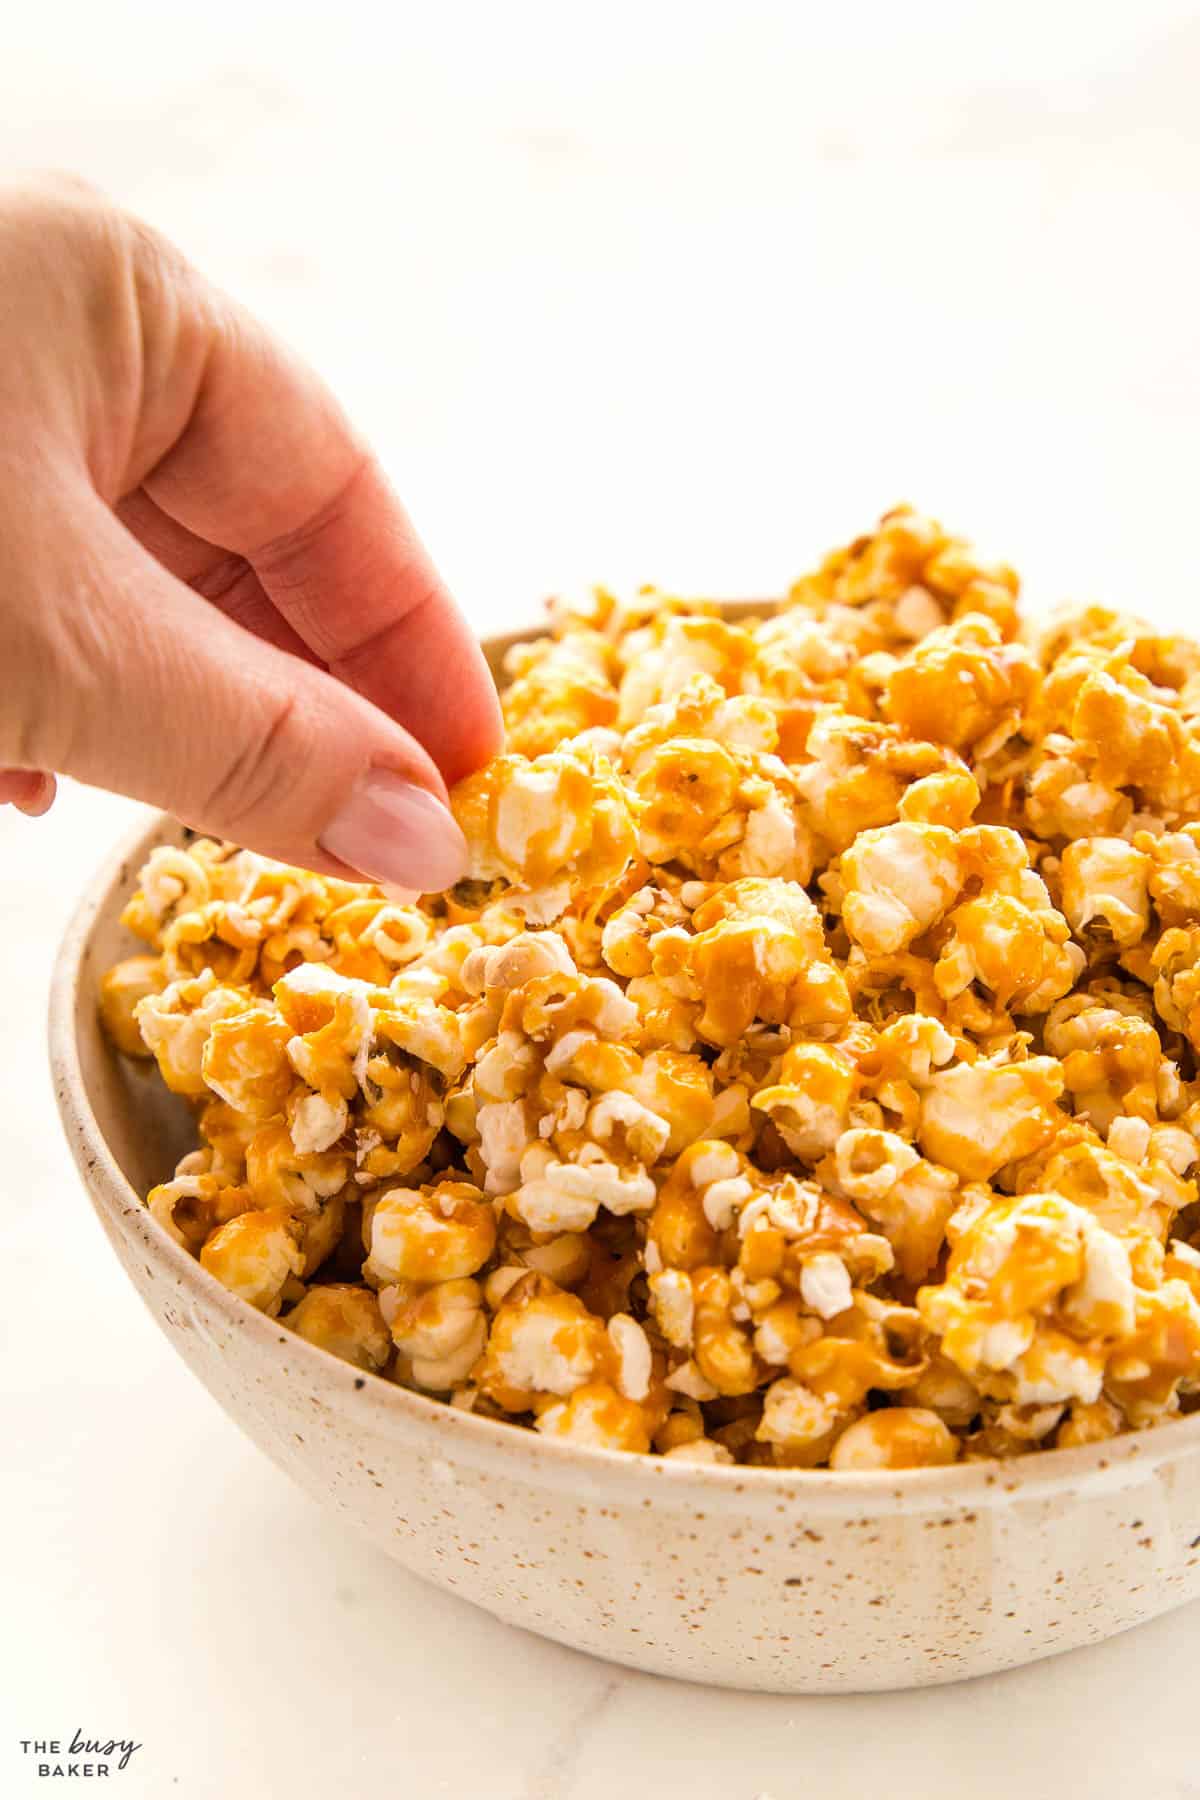 hand reaching for a piece of caramel popcorn from a ceramic bowls